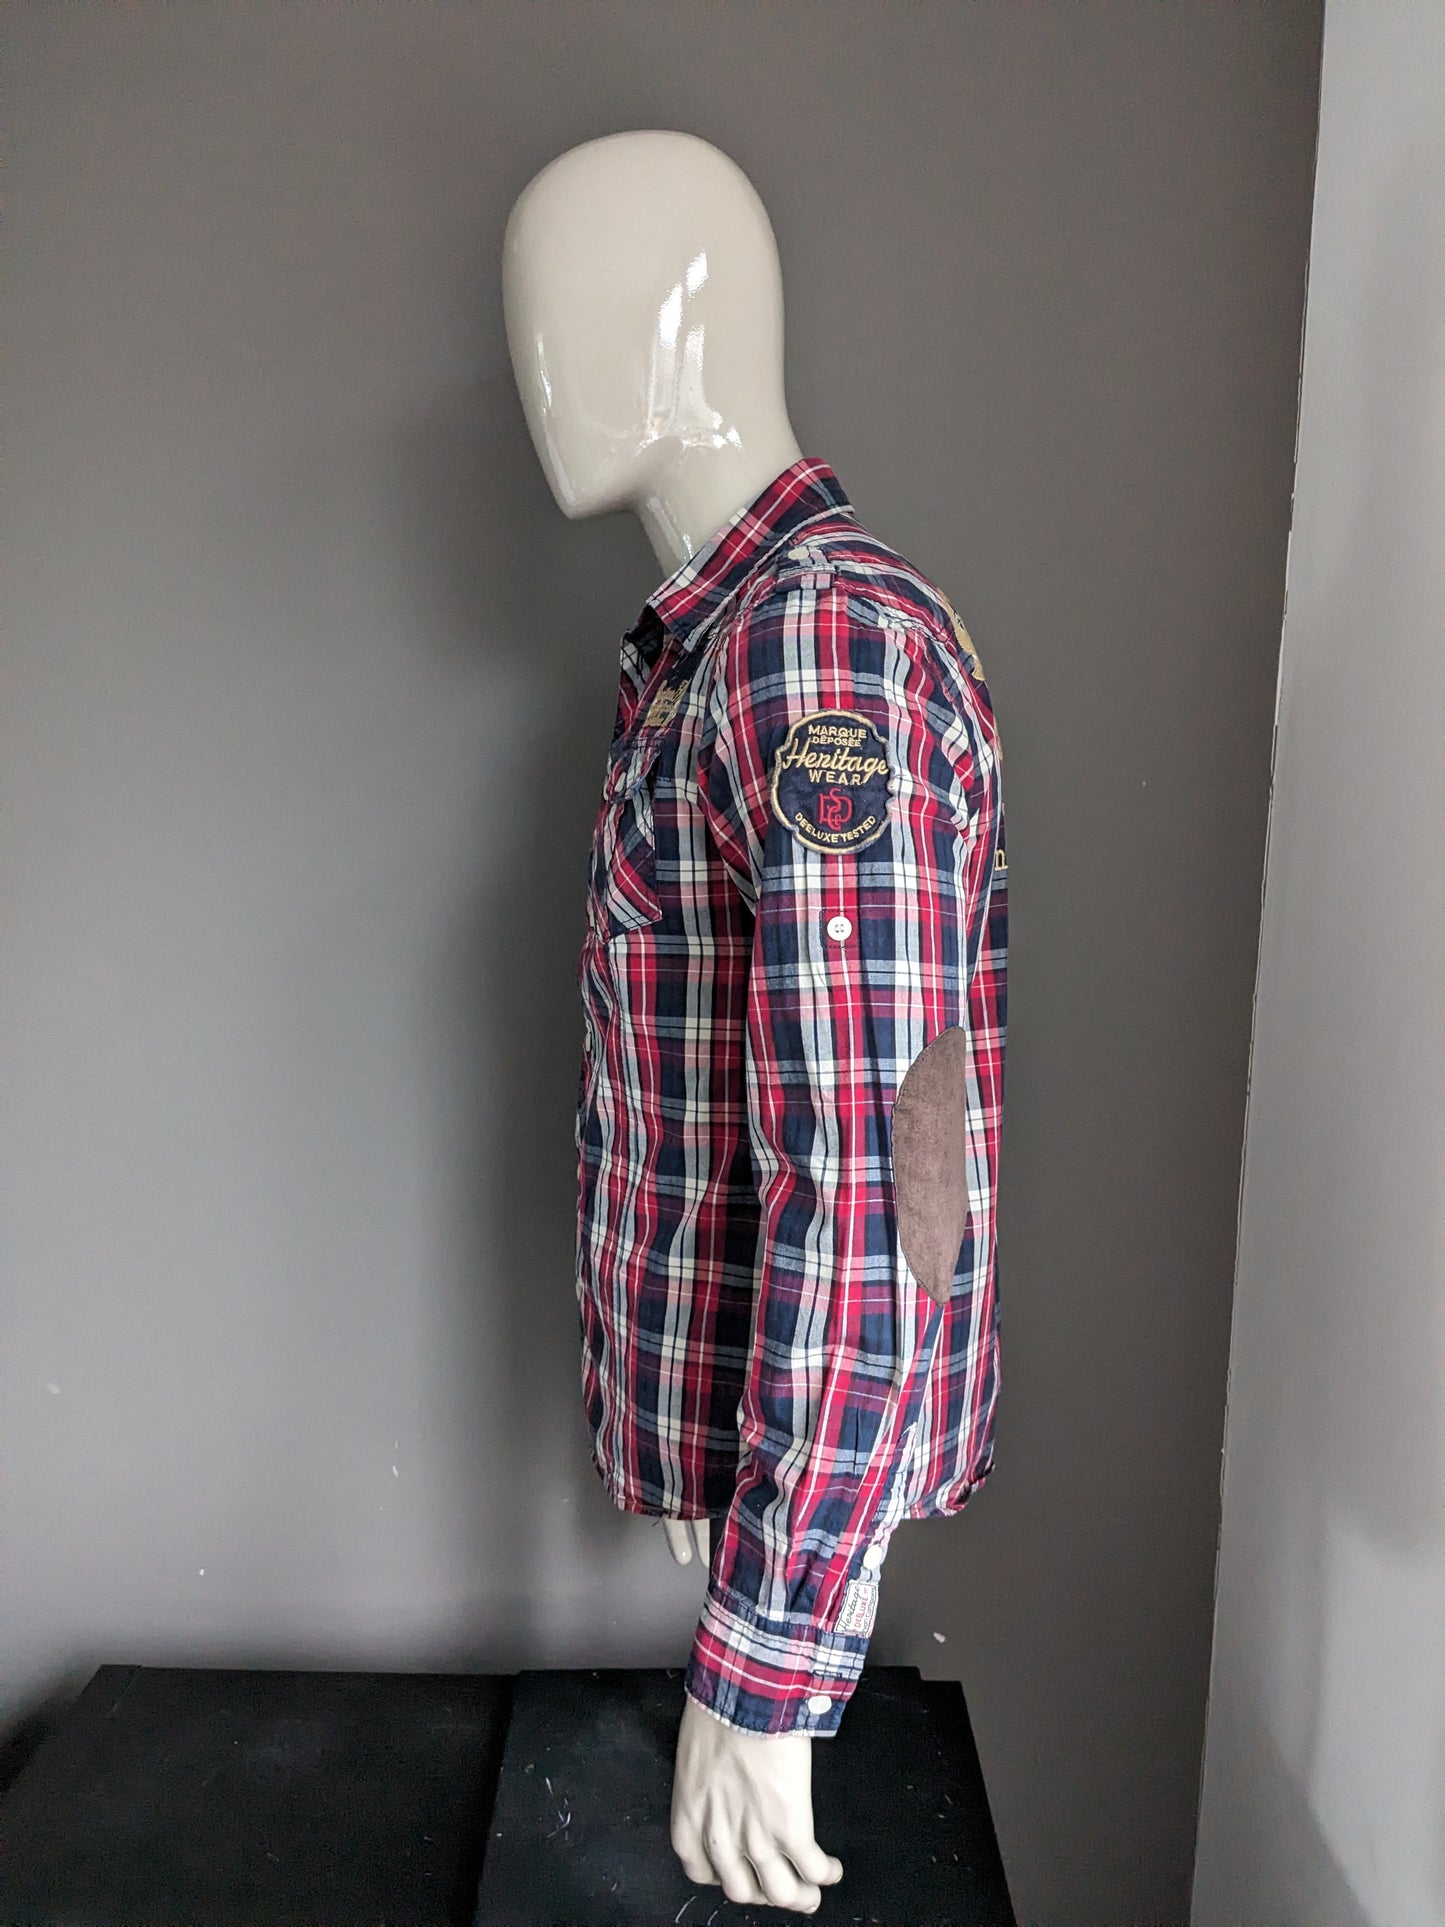 Partuxe shirt. Blue red white checkered with applications. Size L.